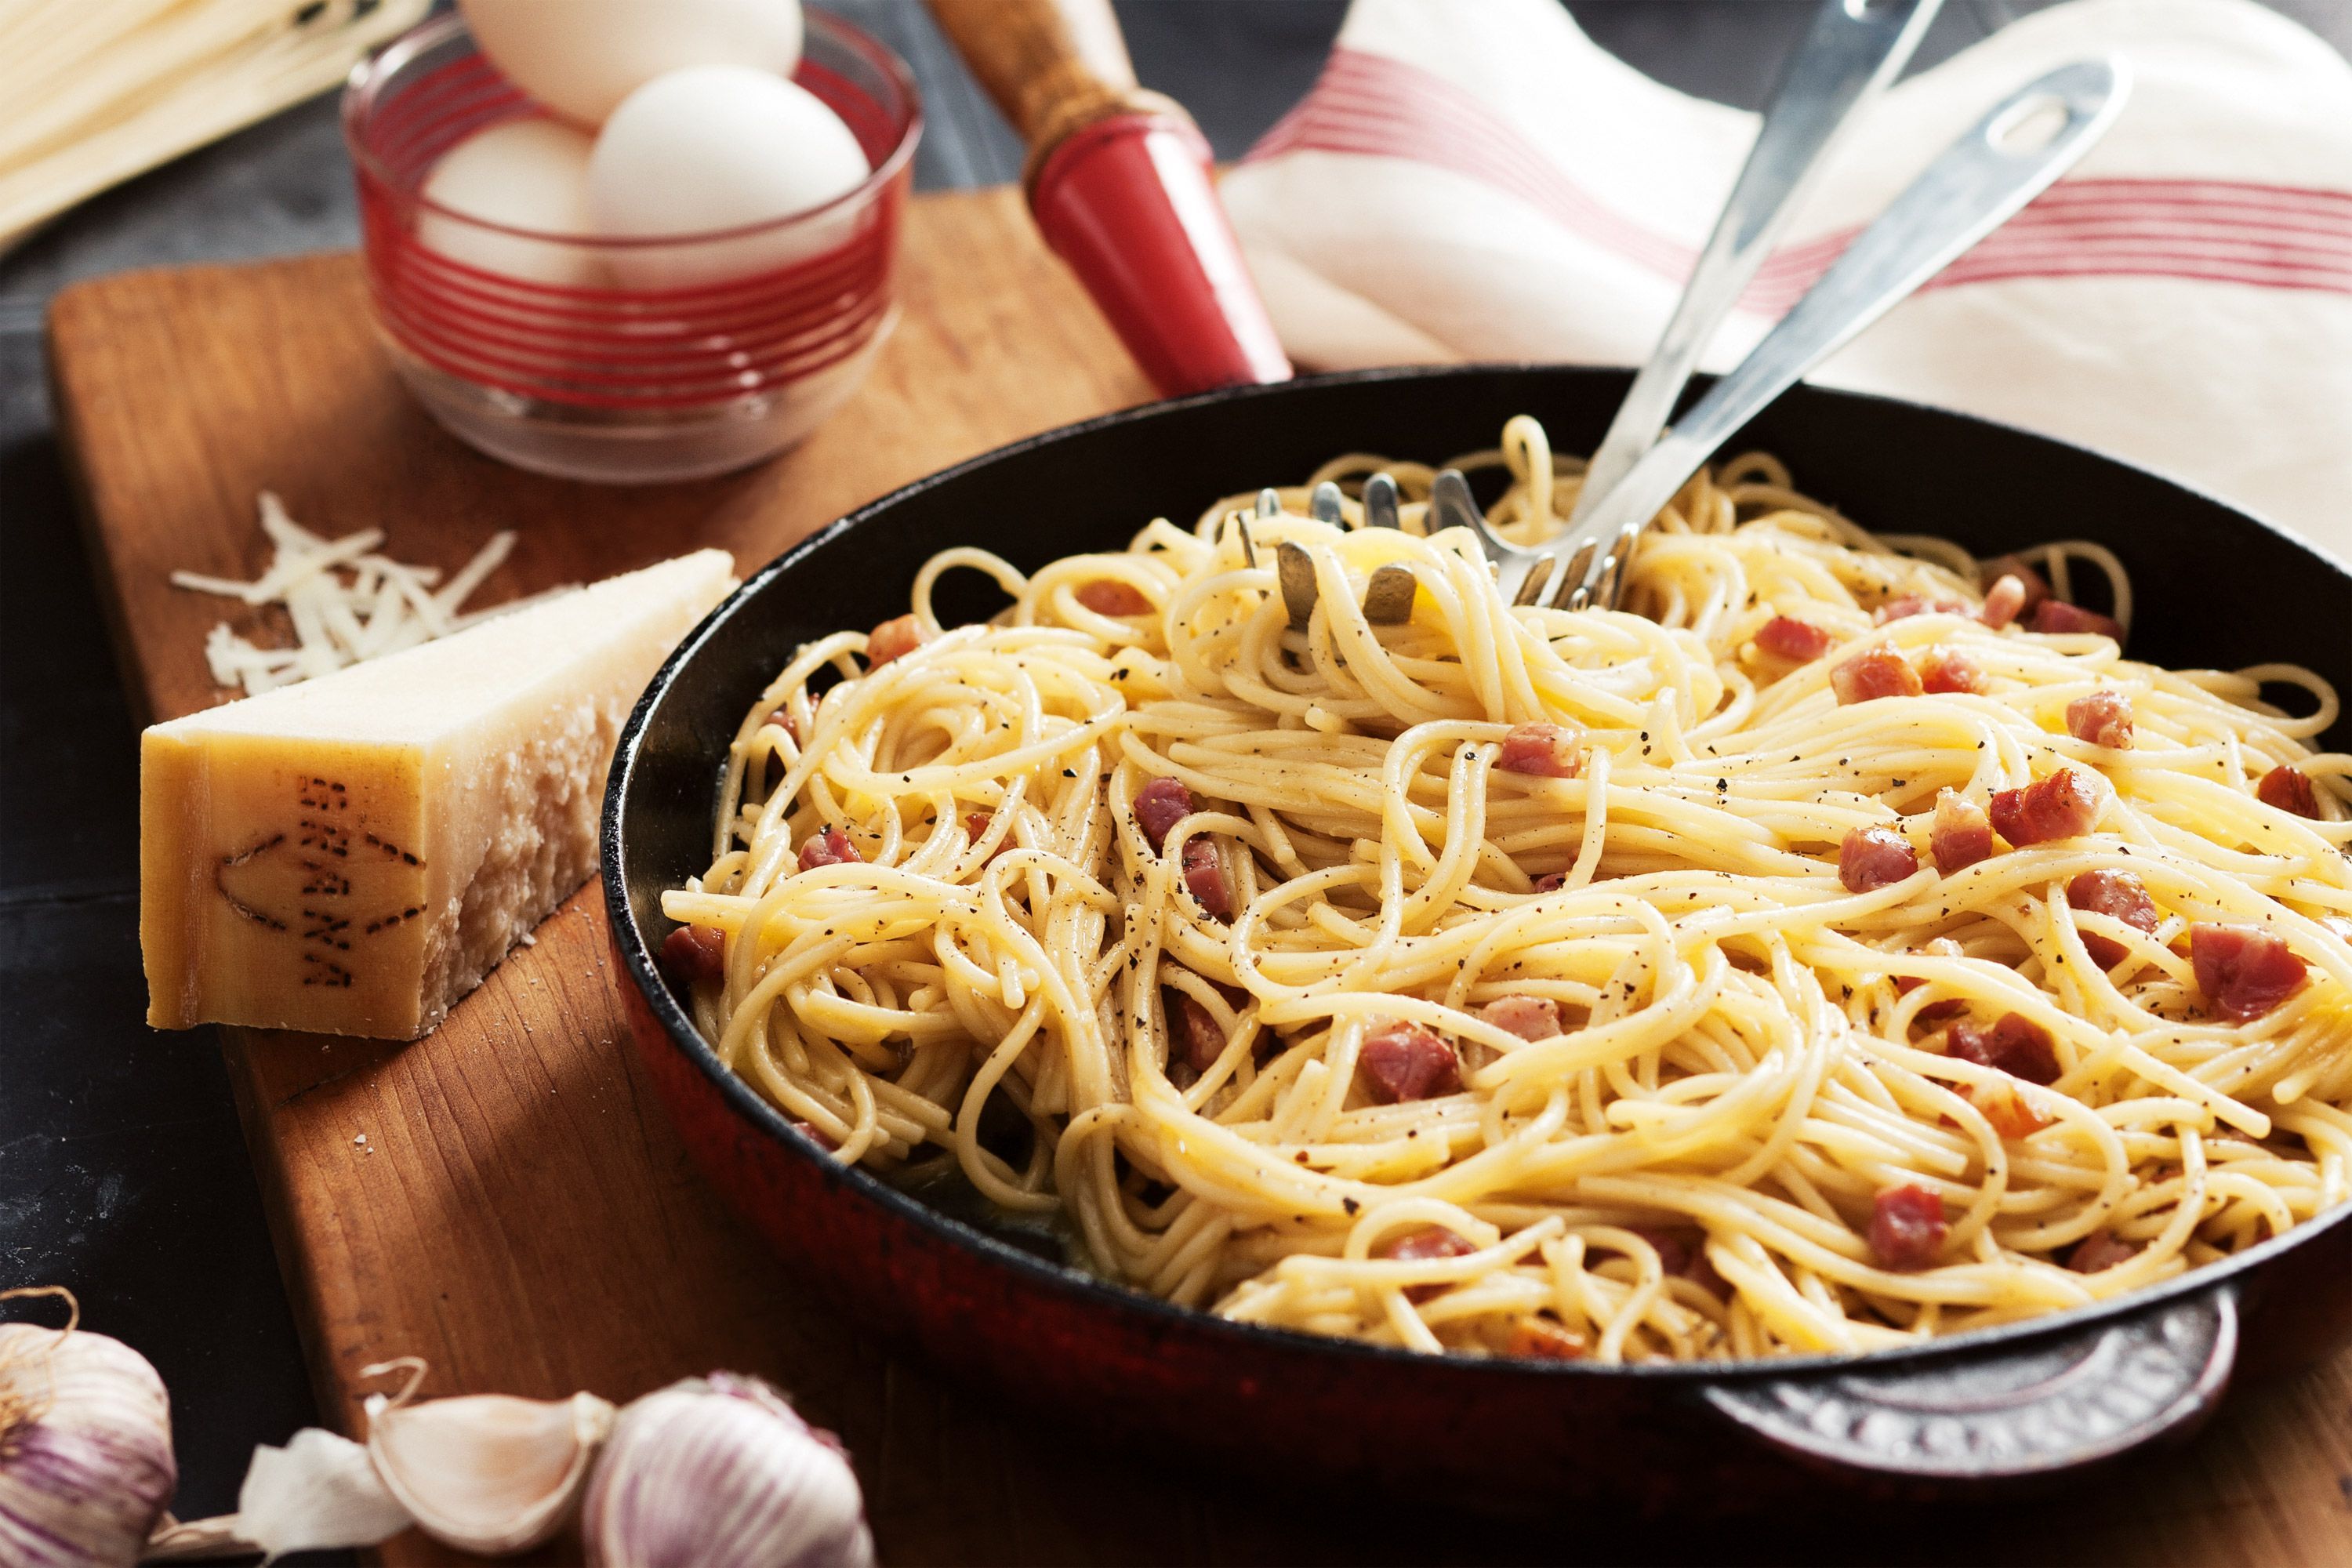 Spaghetti Alla Carbonara In a pan with some ingredients